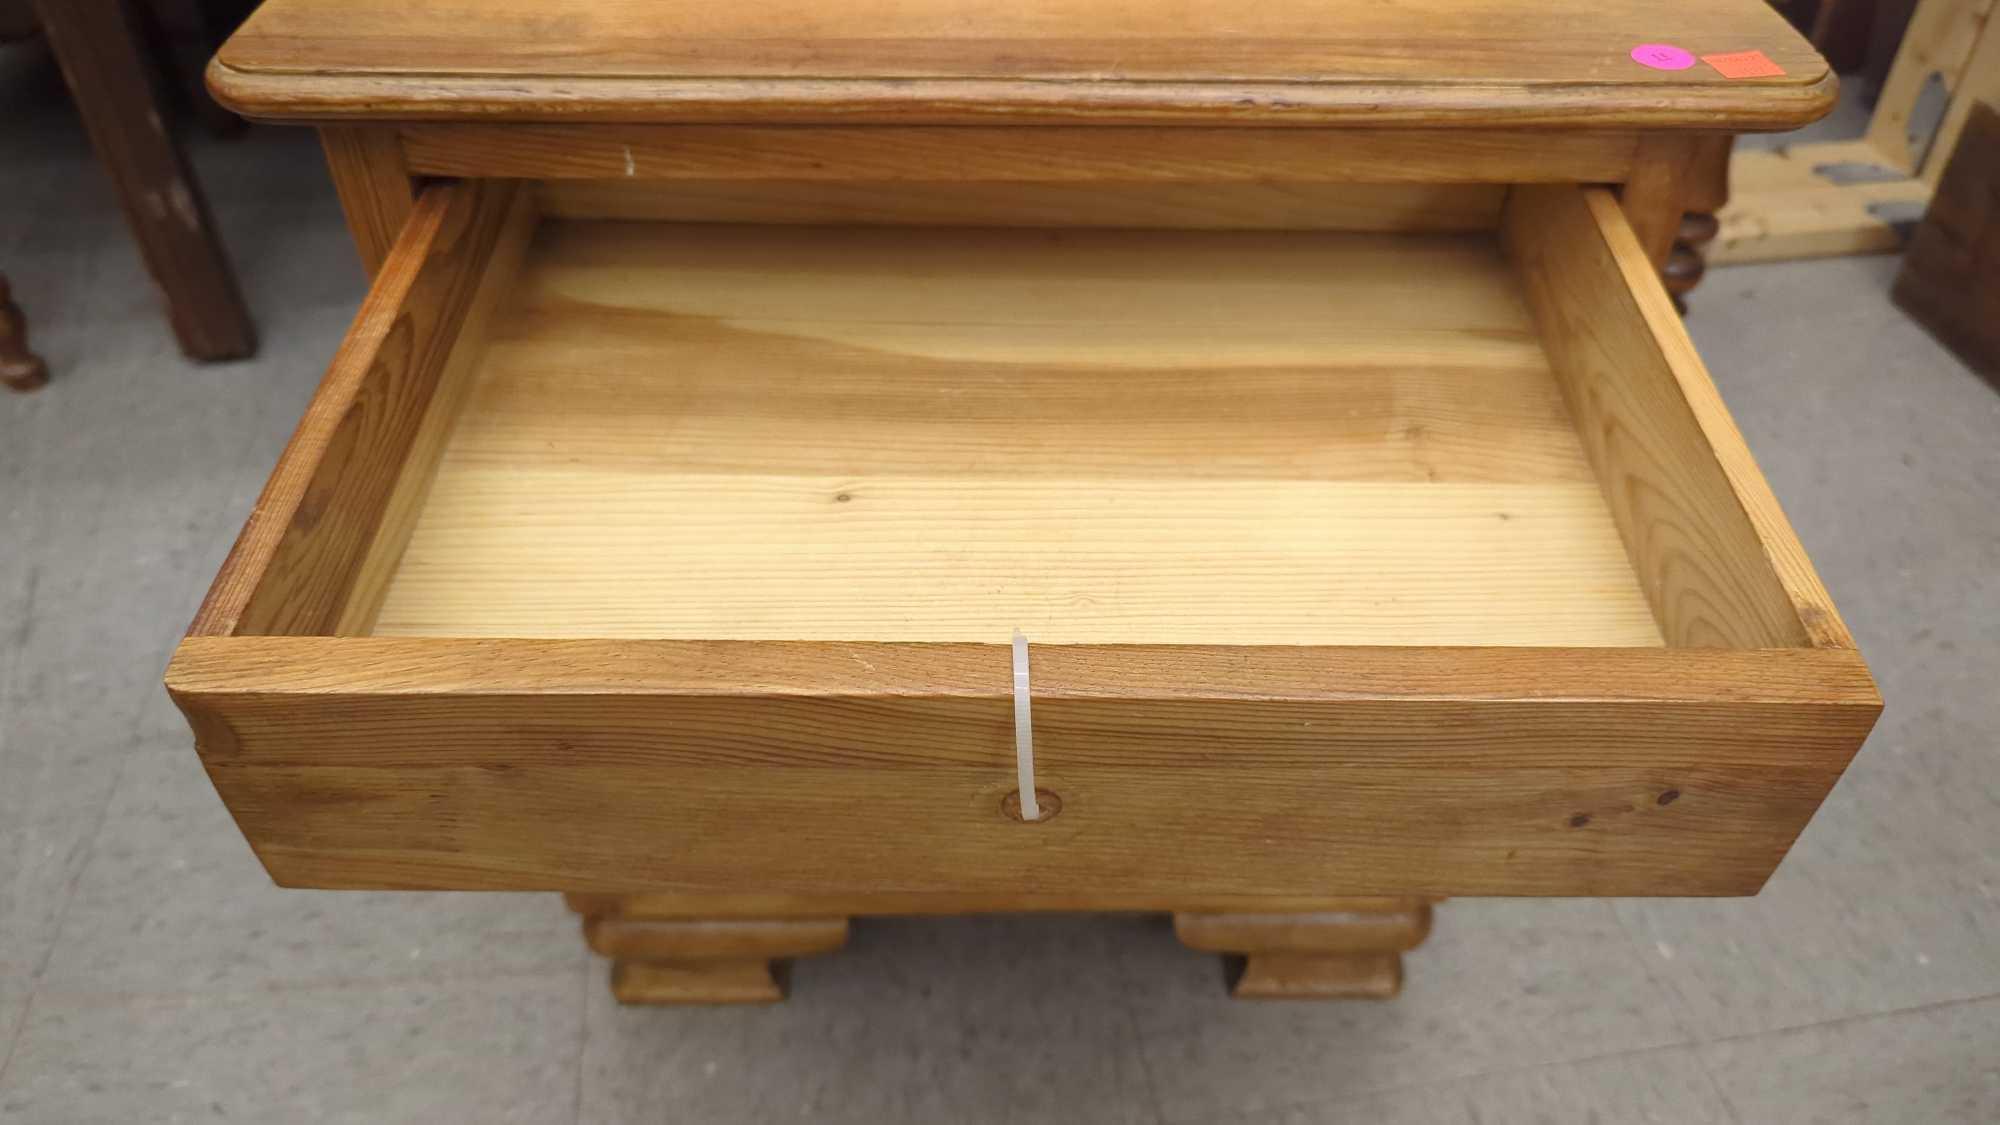 WOODEN SIDE TABLE ONE DRAWER OVER ONE DOOR, MEASURES APPROXIMATELY 20 IN X 14 IN X 22 IN, DRAWER IS